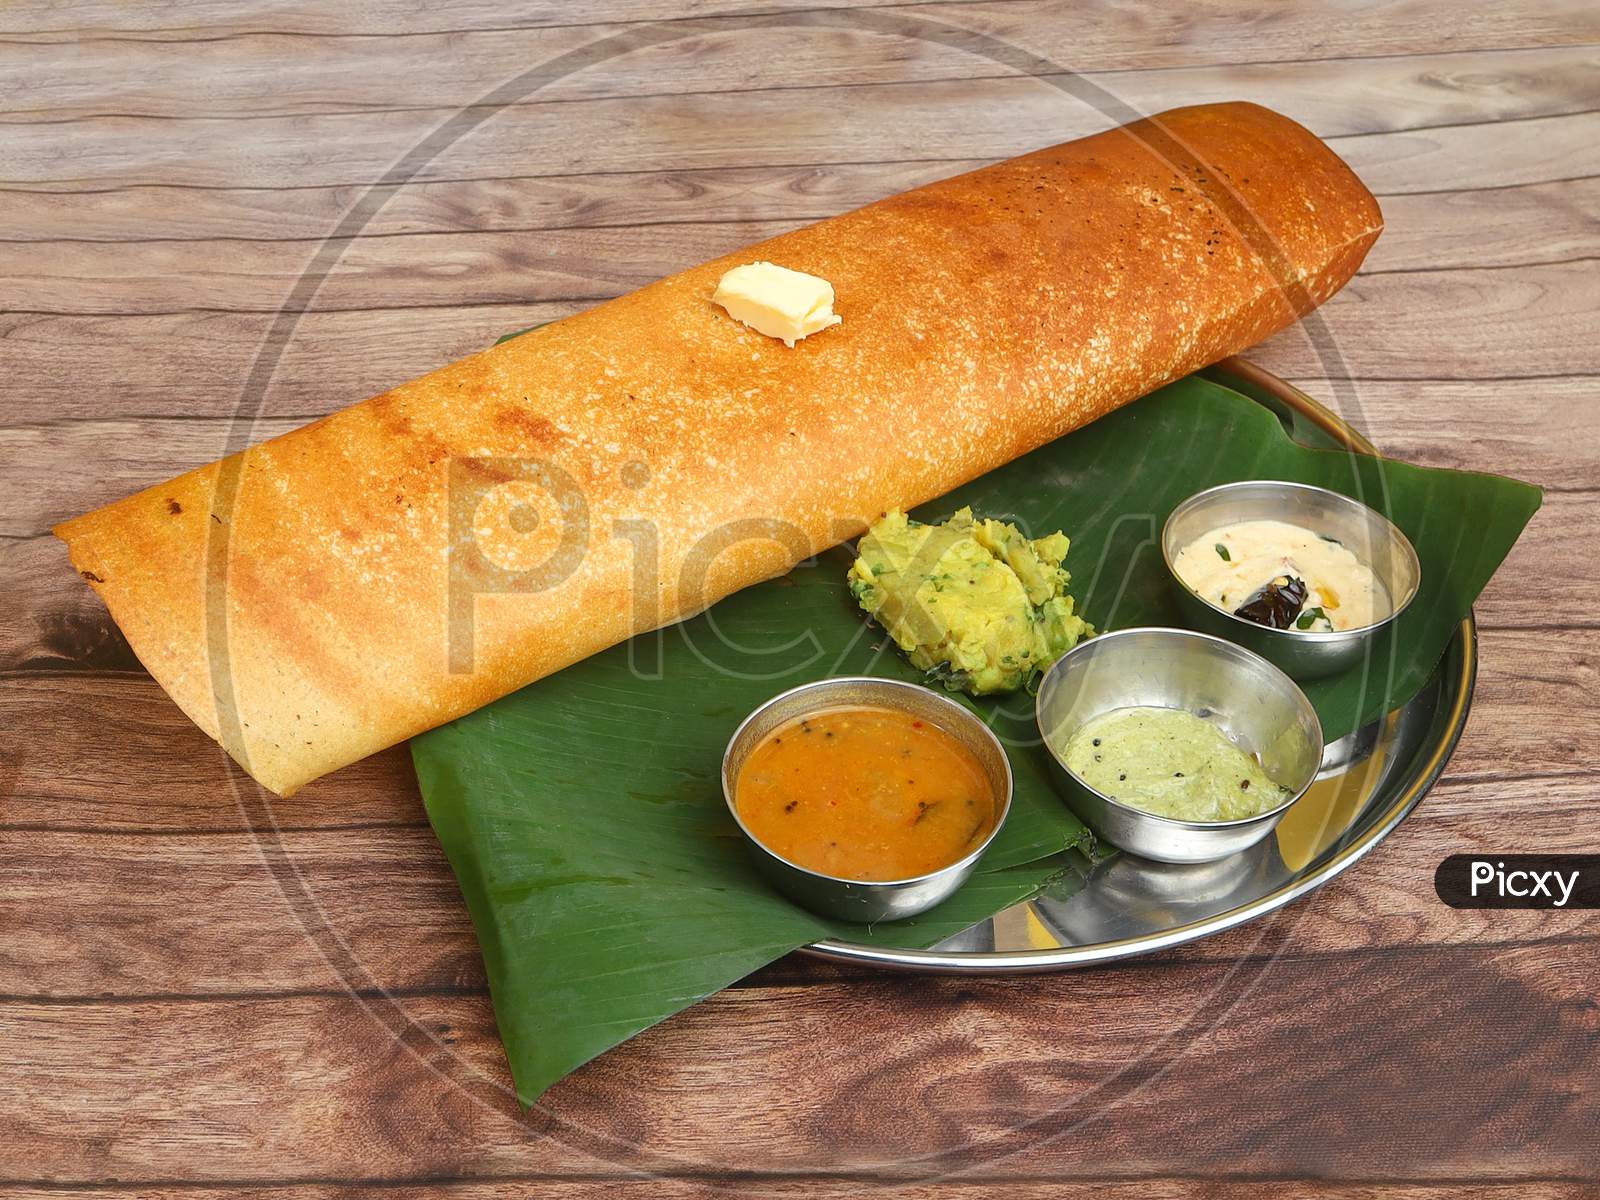 Butter Masala Dosa, A South Indian Traditional And Popular Crepe With Filling Of A Mixture Of Mashed Potatoes And Fried Onions, With A Butter Topping Served With Chutney And Sambar, Selective Focus